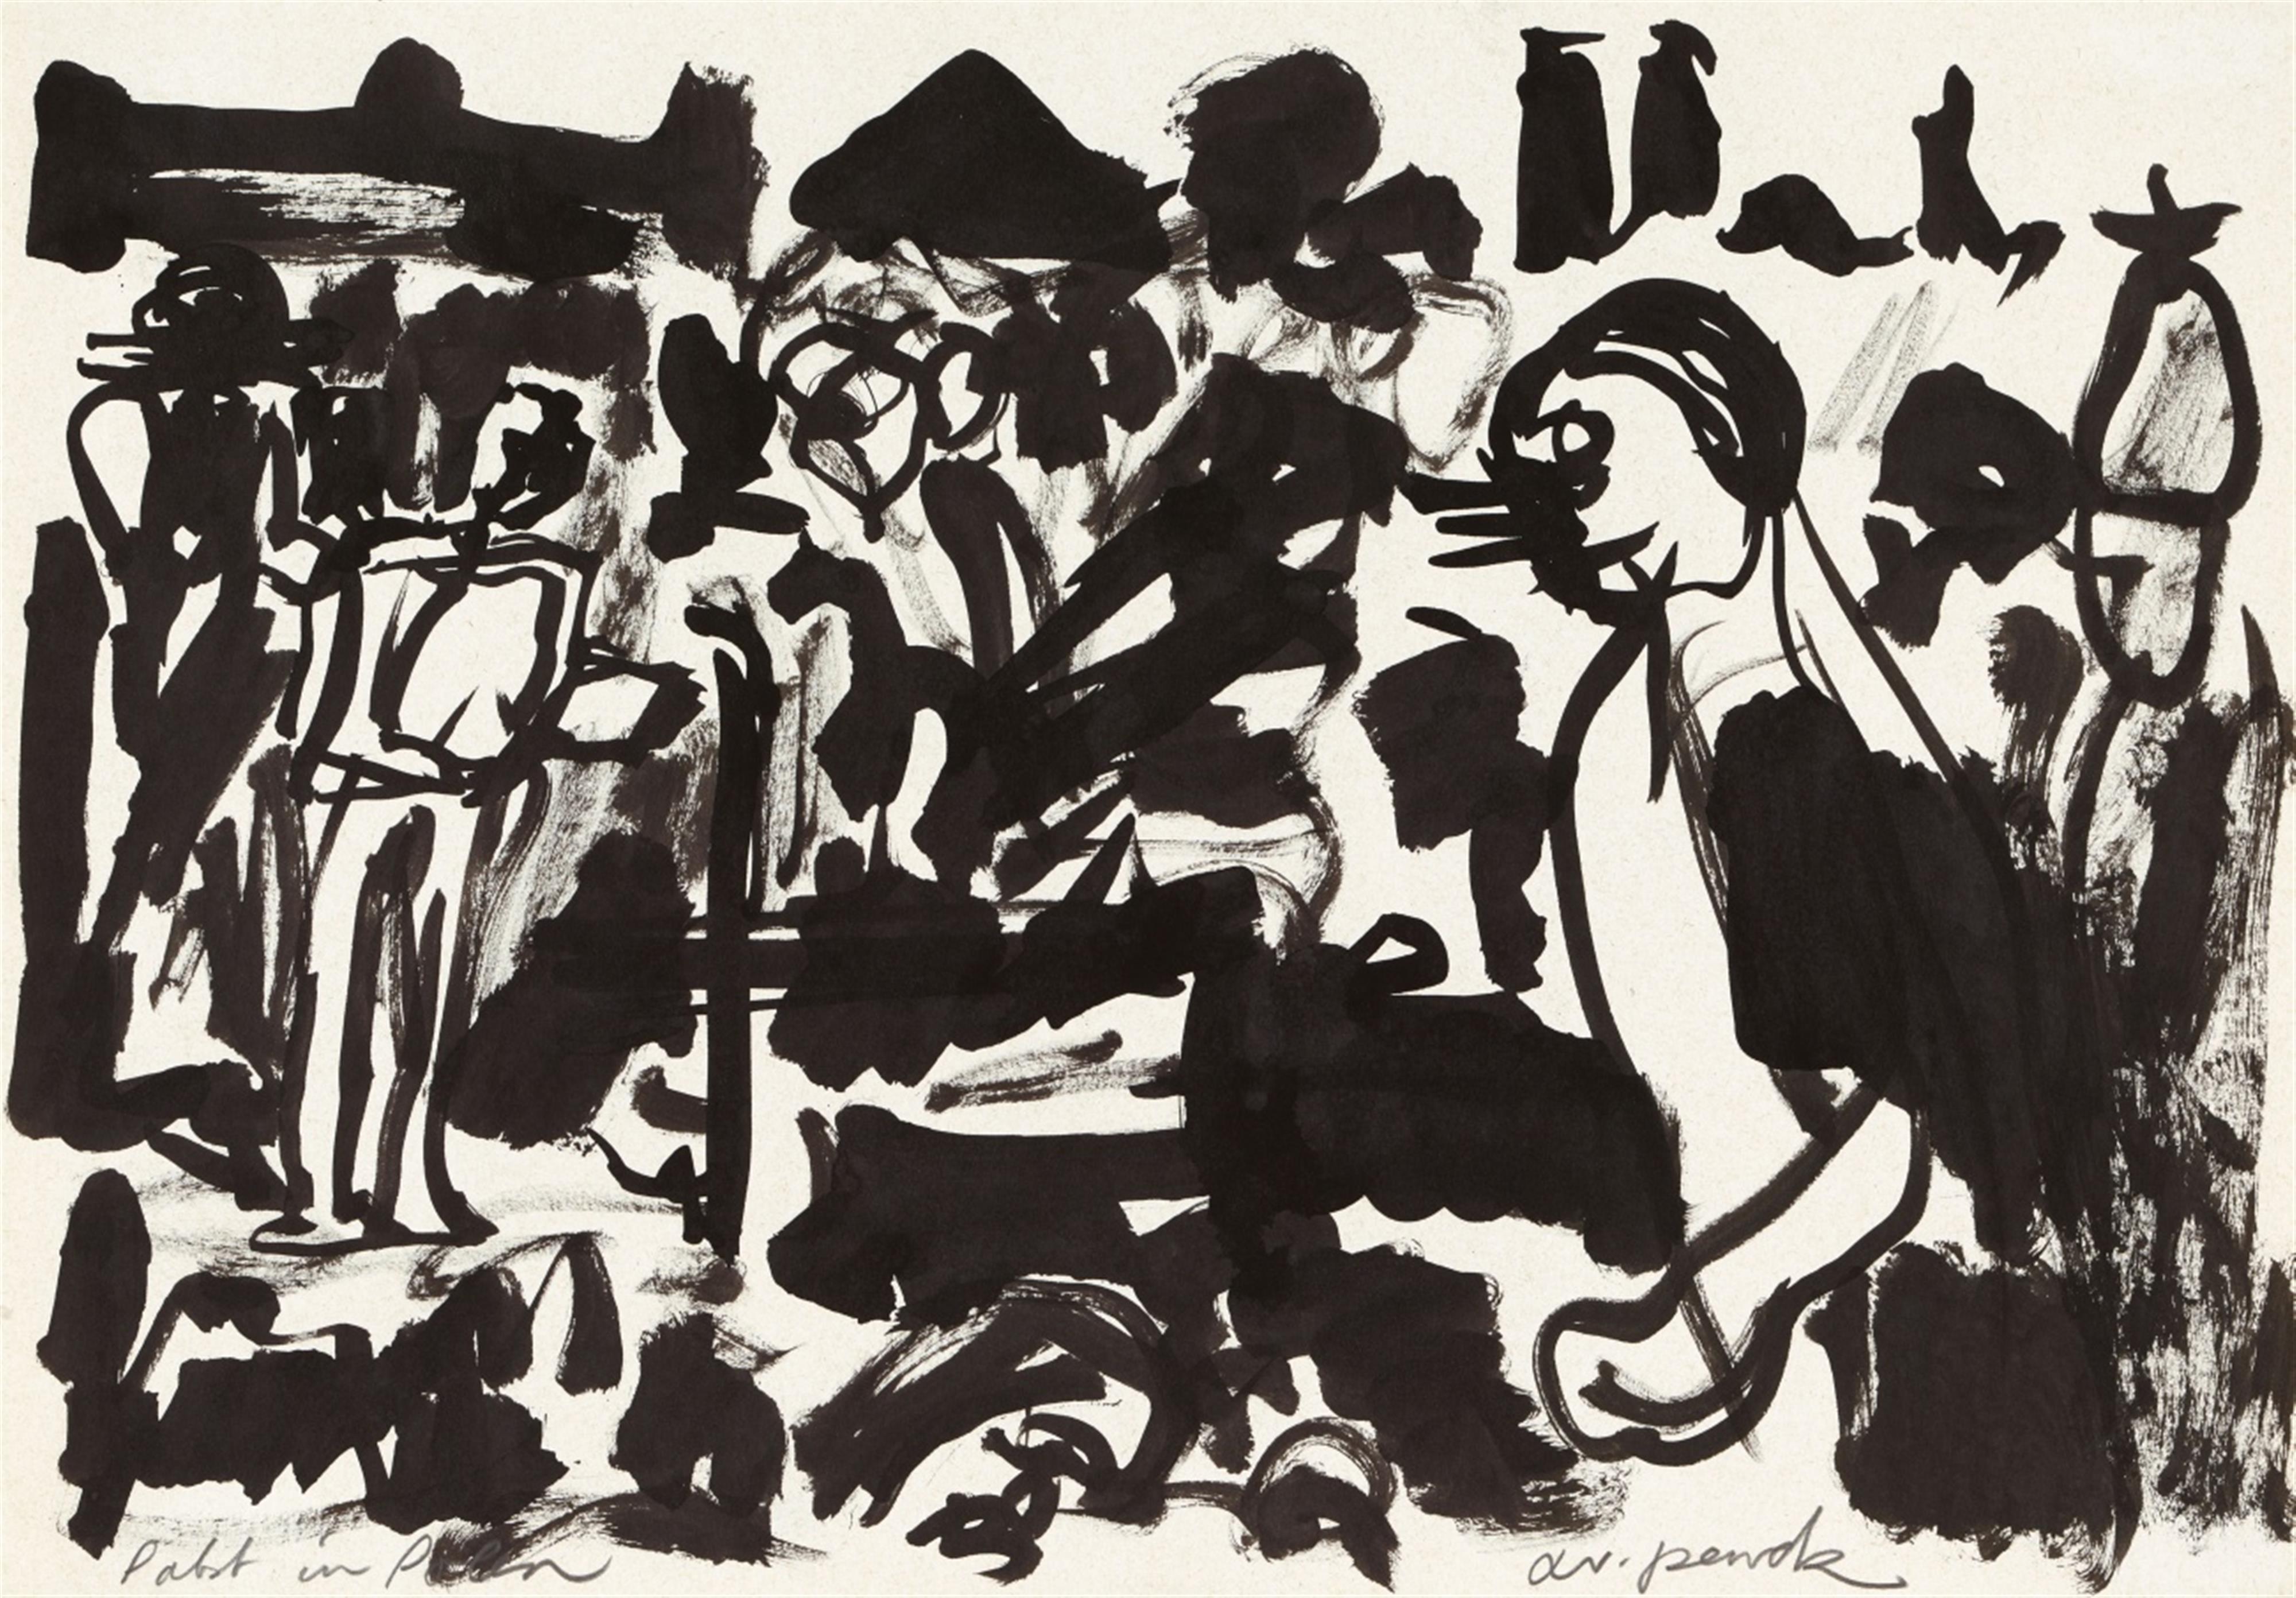 A.R. Penck - Pabst in Polen - image-9